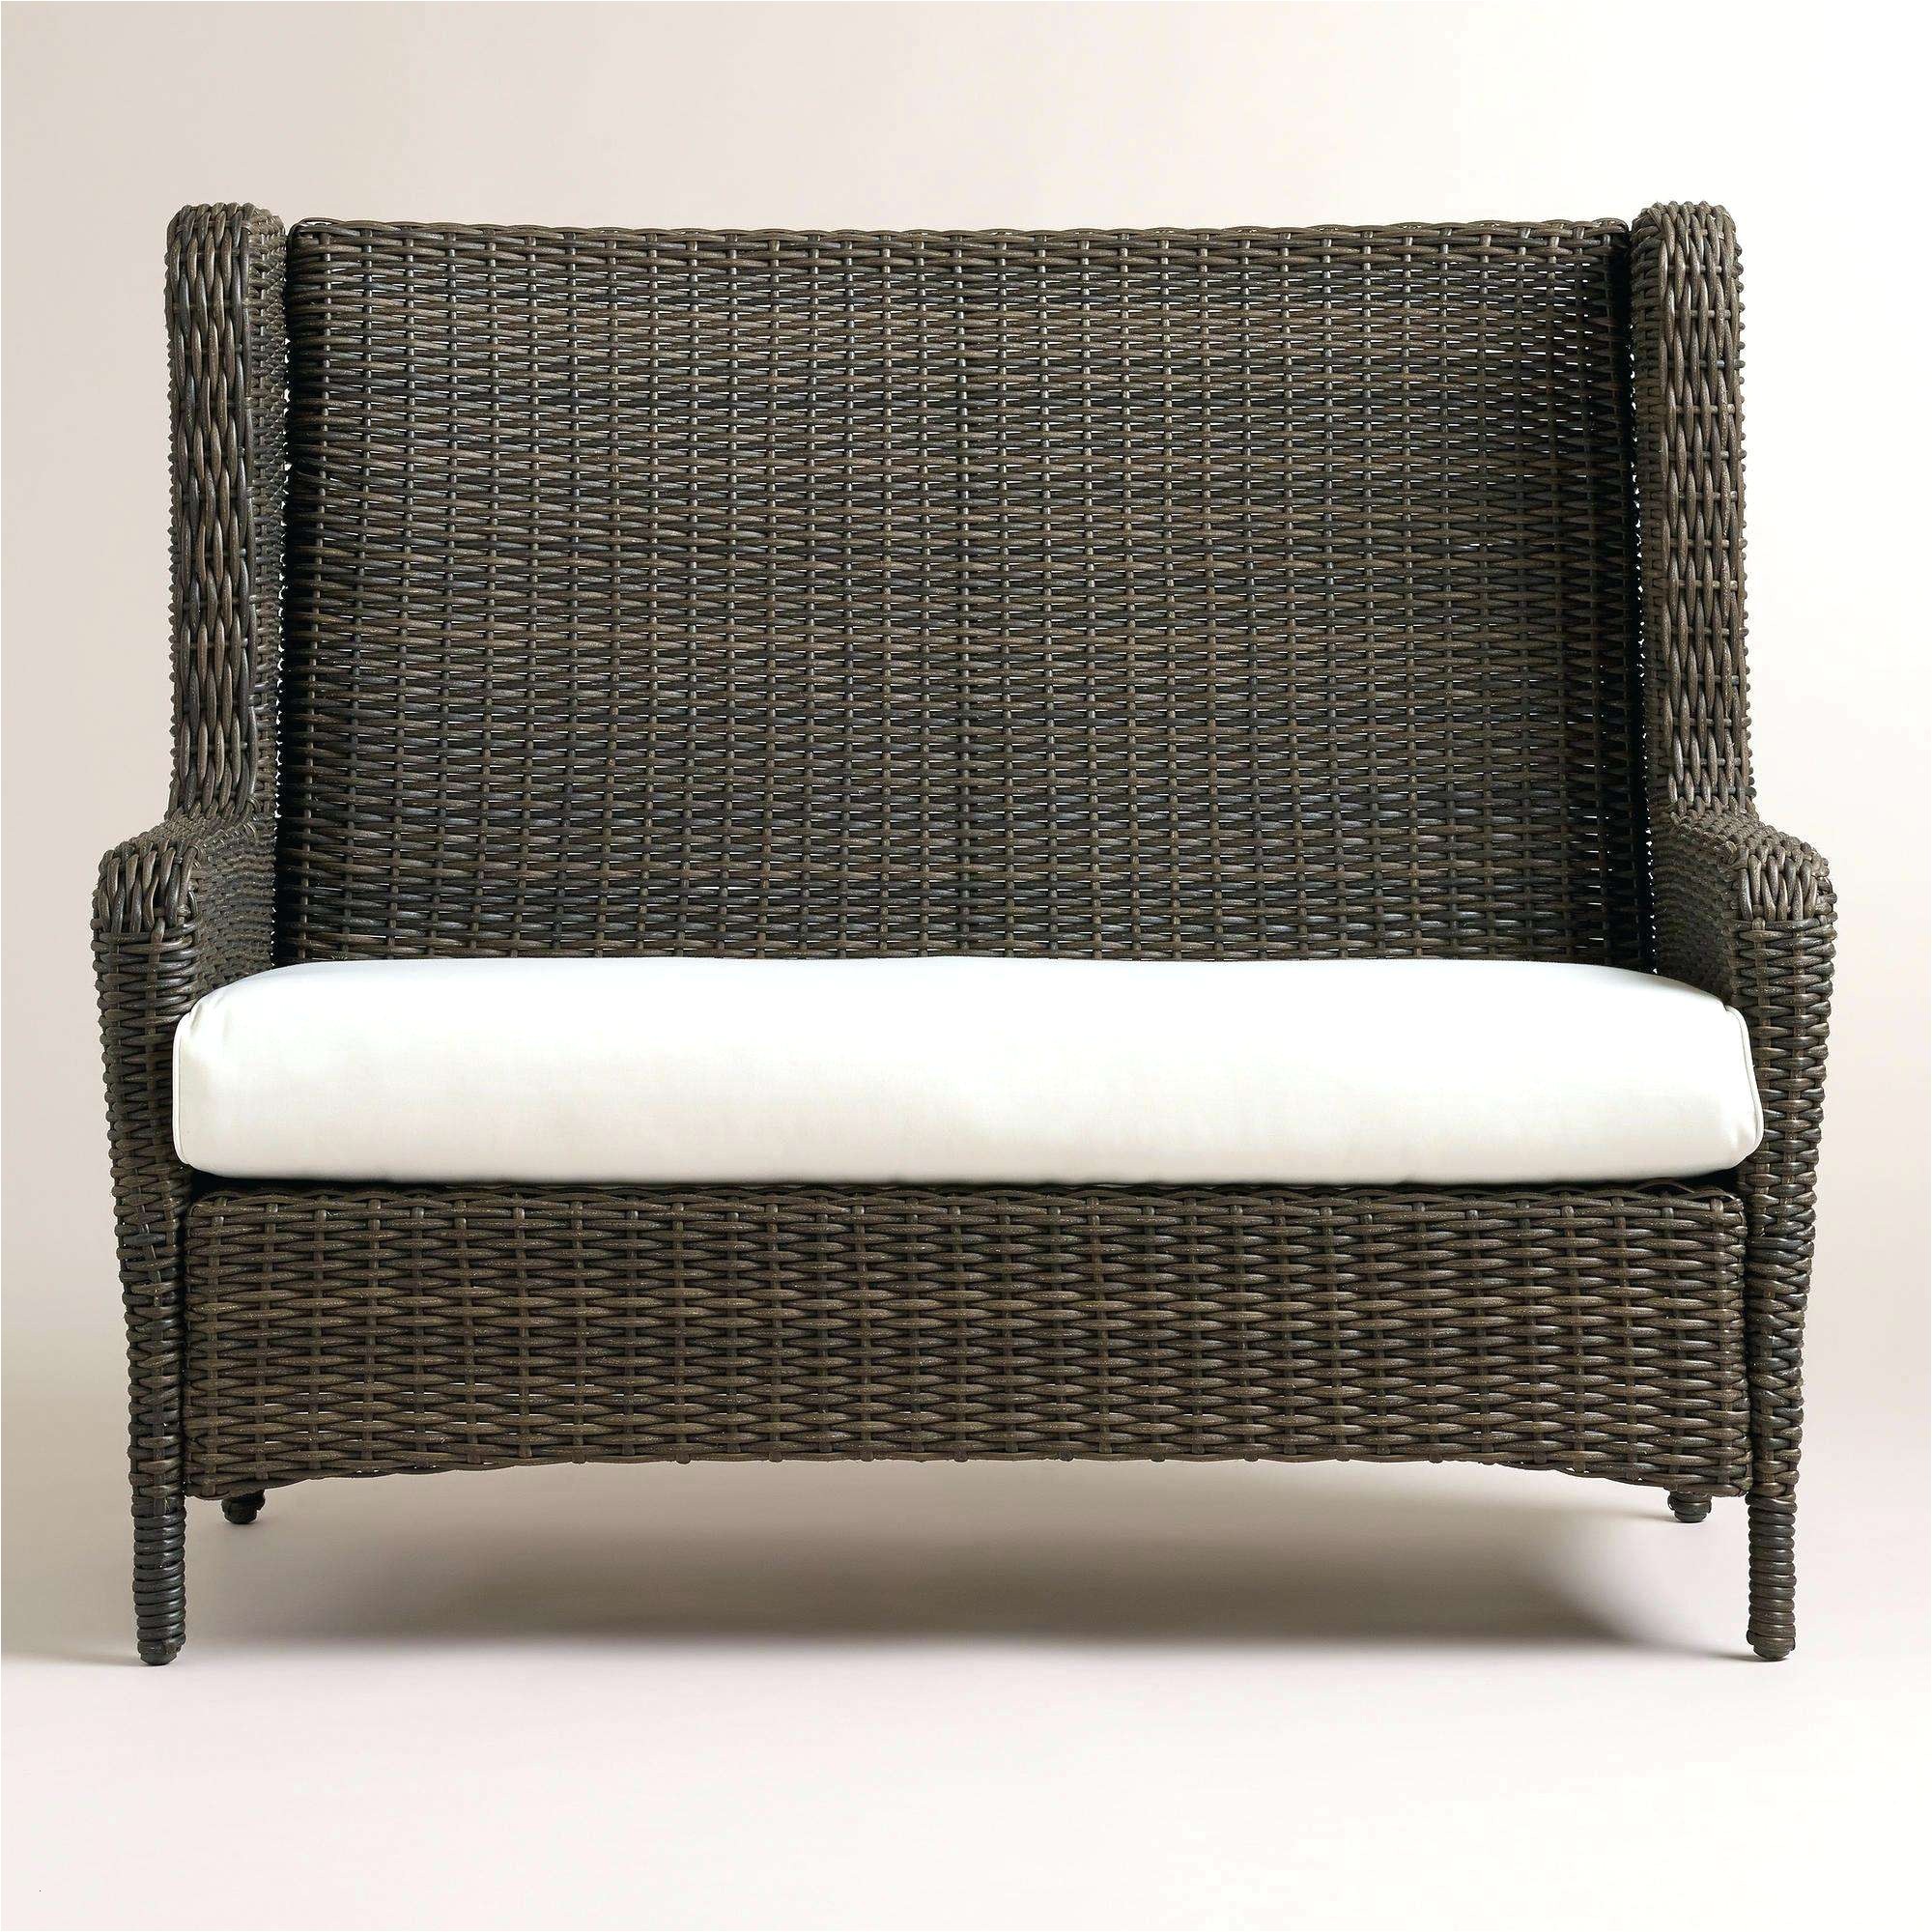 Sofas On Sale at Target Outdoor Sectional Replacement Cushions New Wicker Outdoor sofa 0d